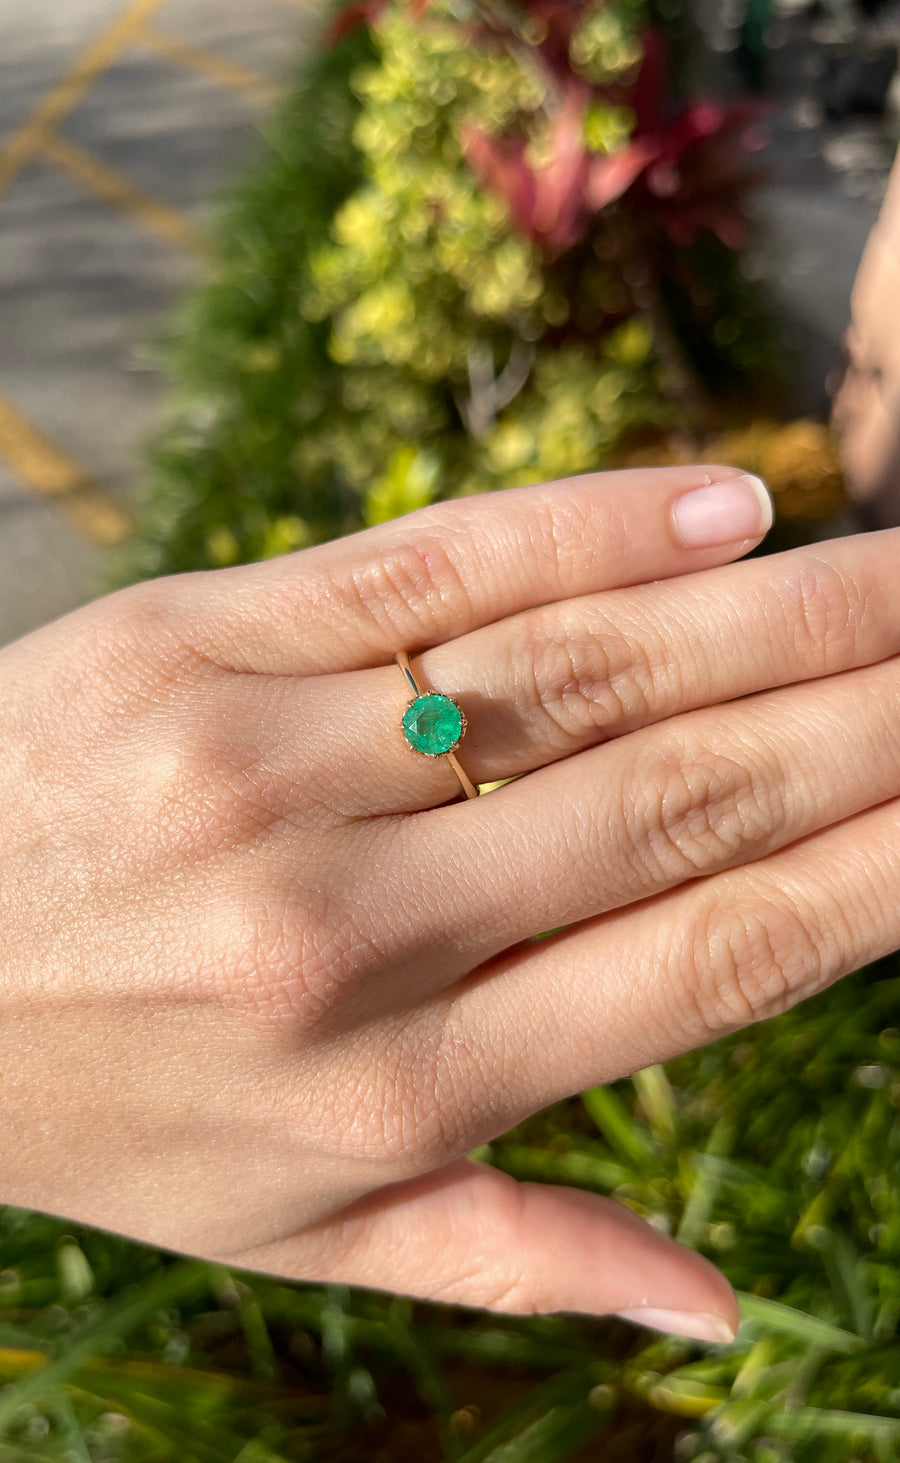 Celebrate Love: Anniversary Ring Featuring 1.0 Carat Round Colombian Emerald in 14K Gold